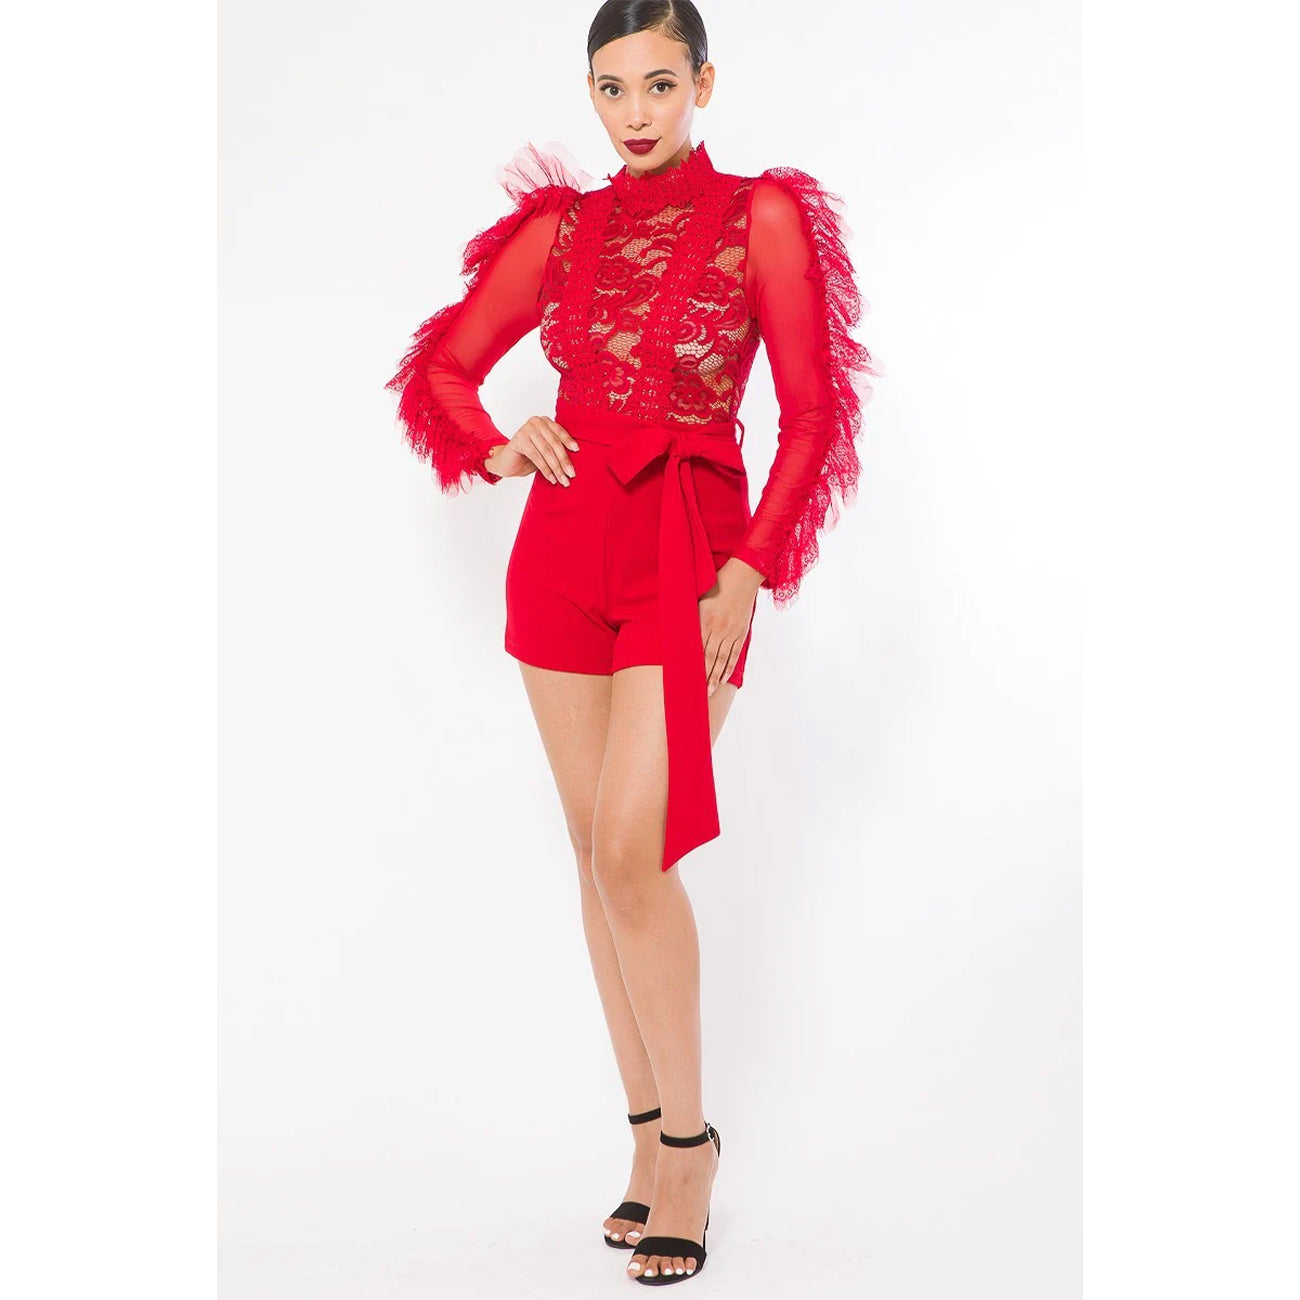 Lace And Crochet Women's Top Fashion Romper